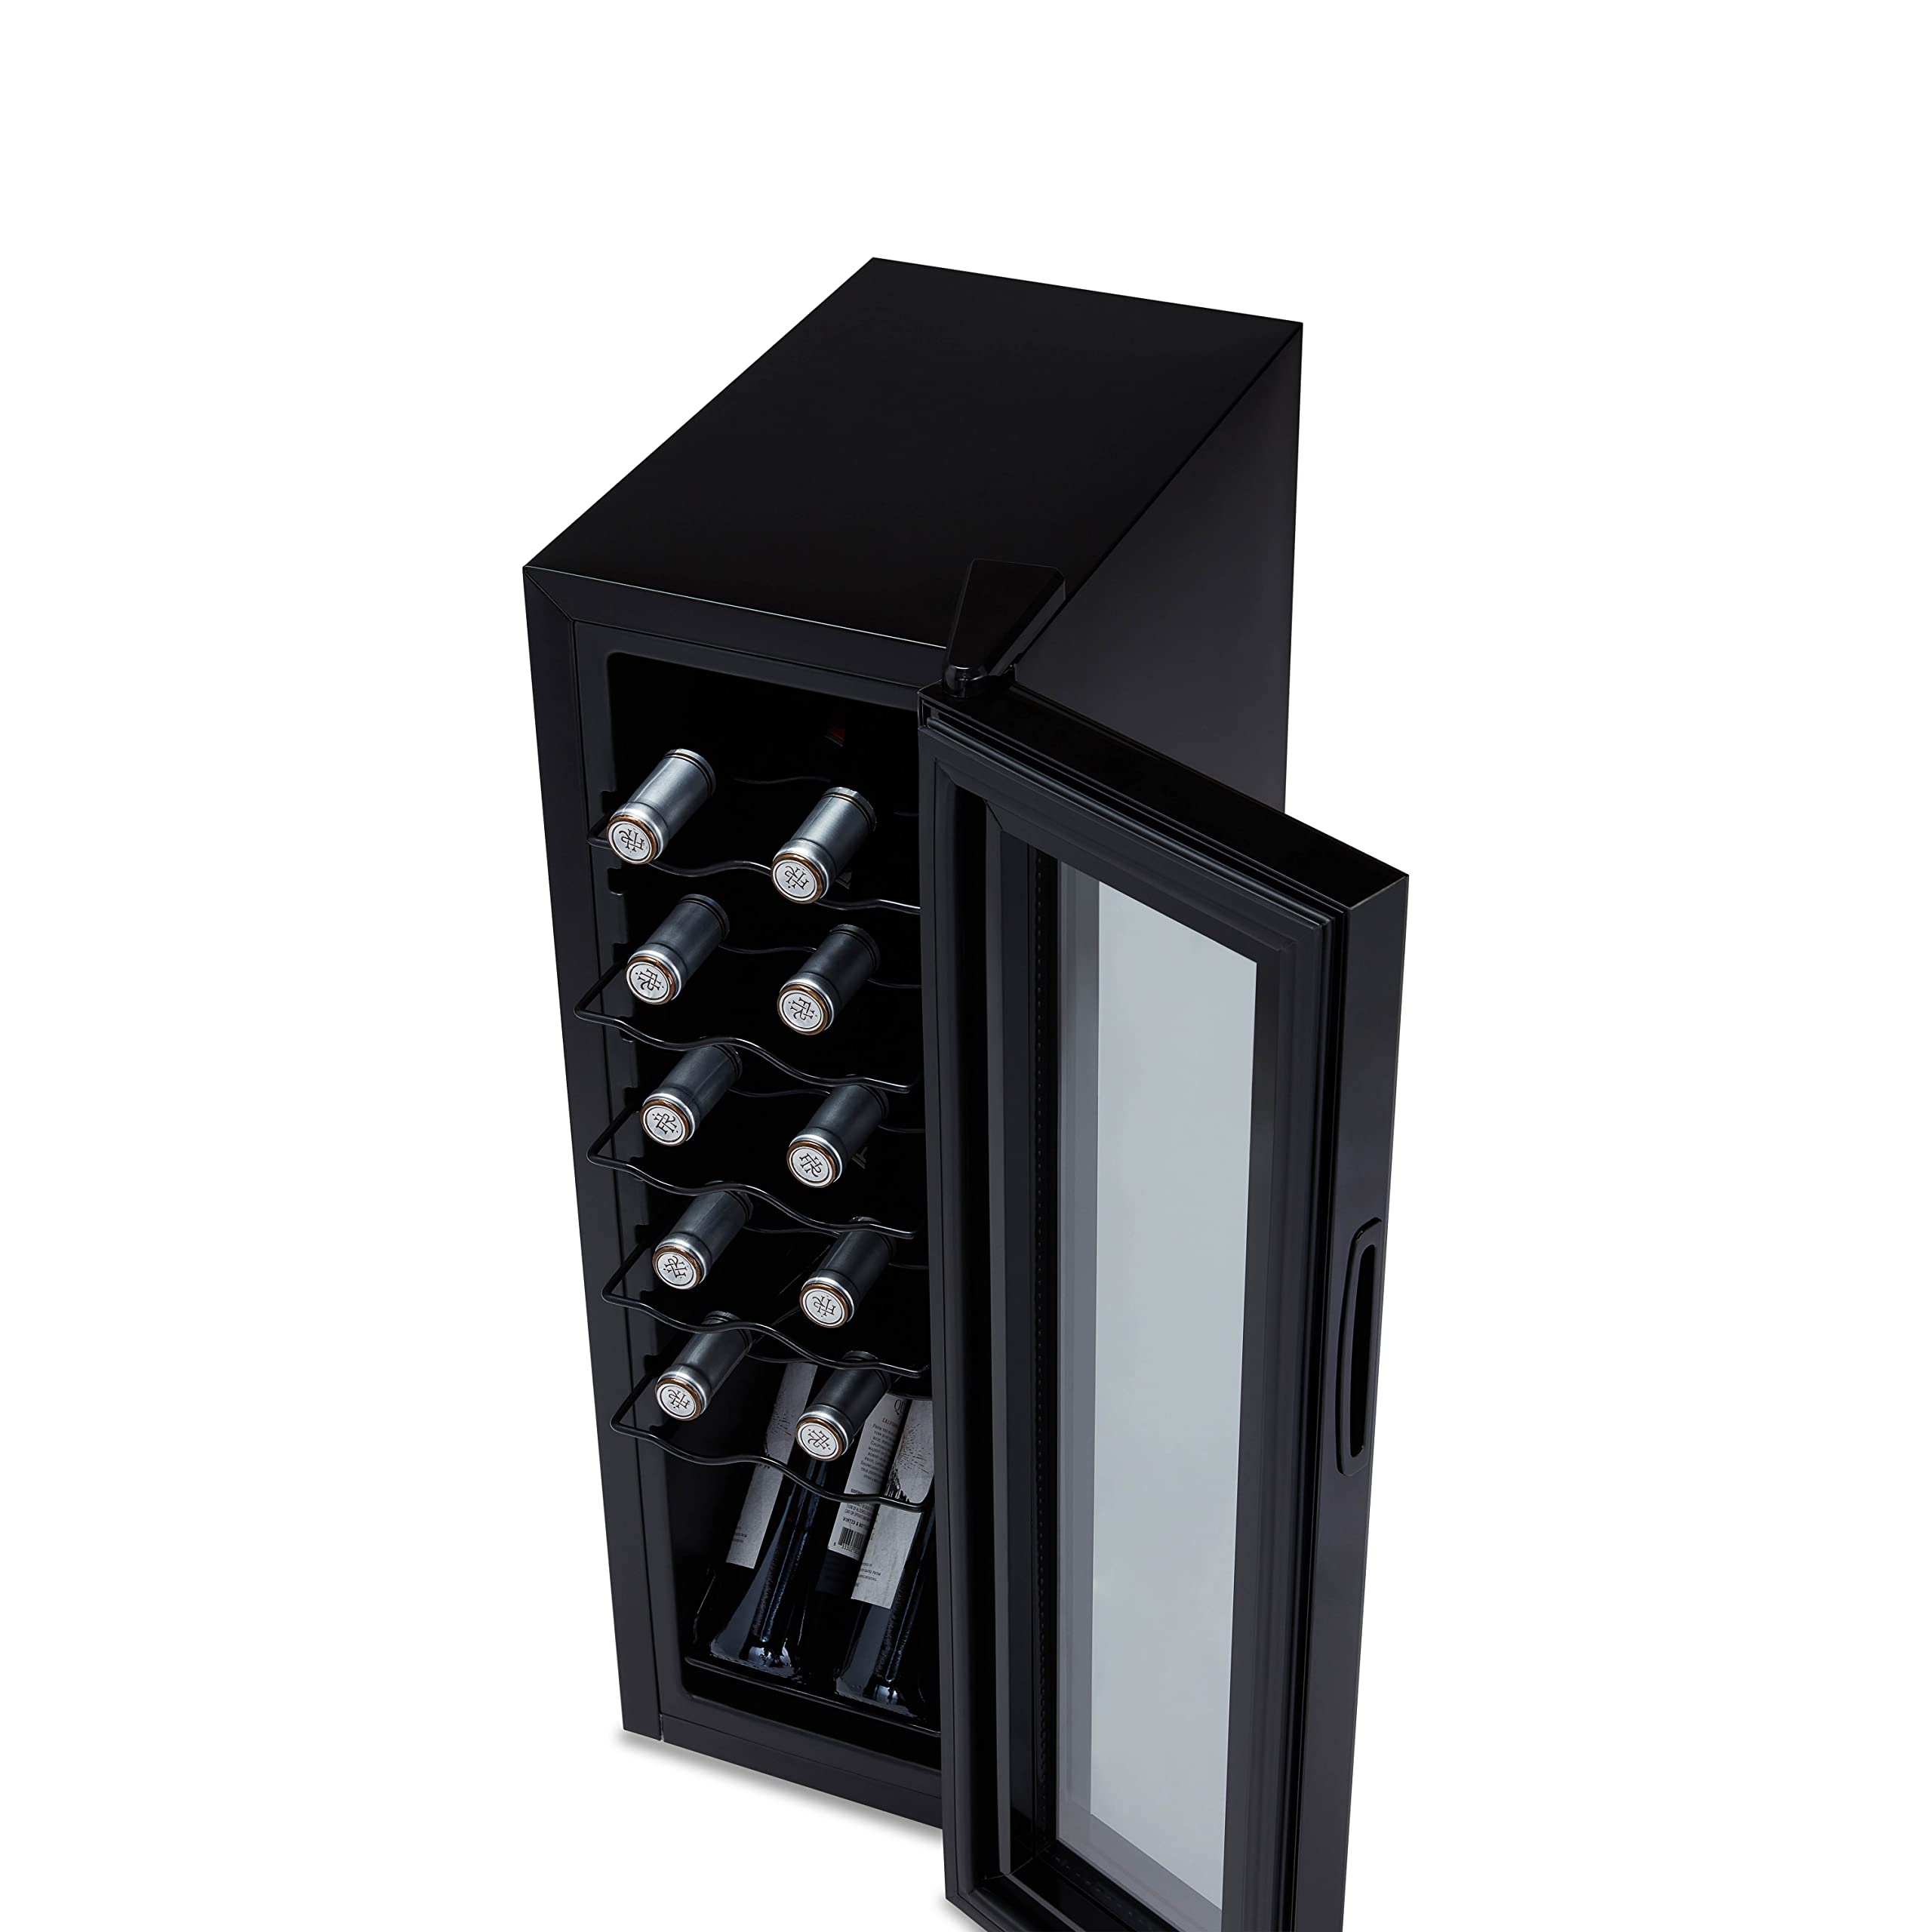 Newair 12 Bottle Wine Cooler Refrigerator | Shadow Series | Freestanding Mirrored Wine and Beverage Fridge with Double-Layer Tempered Glass Door & Compressor Cooling For Reds, Whites, & Sparkling Wine